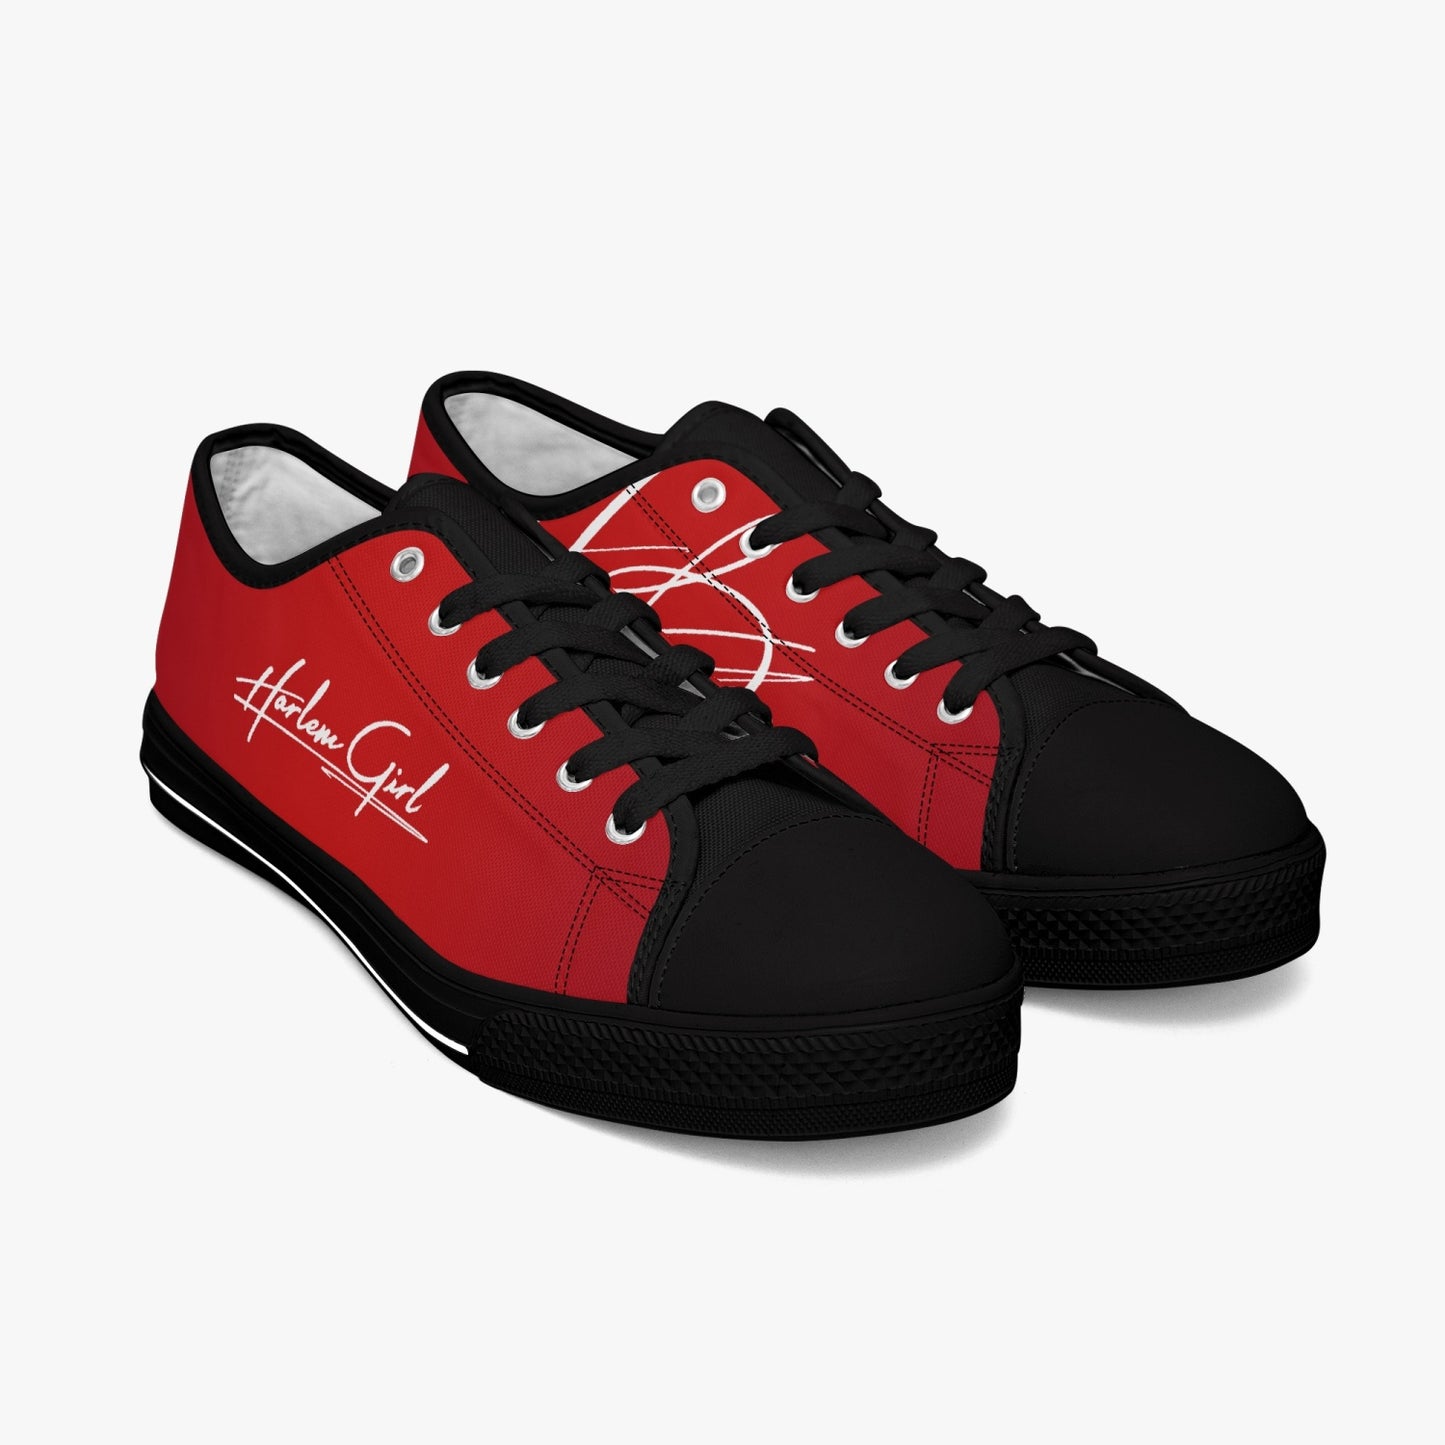 Harlem Girl "Coolee High" Womens Low-Top Canvas Sneaks - Ruby